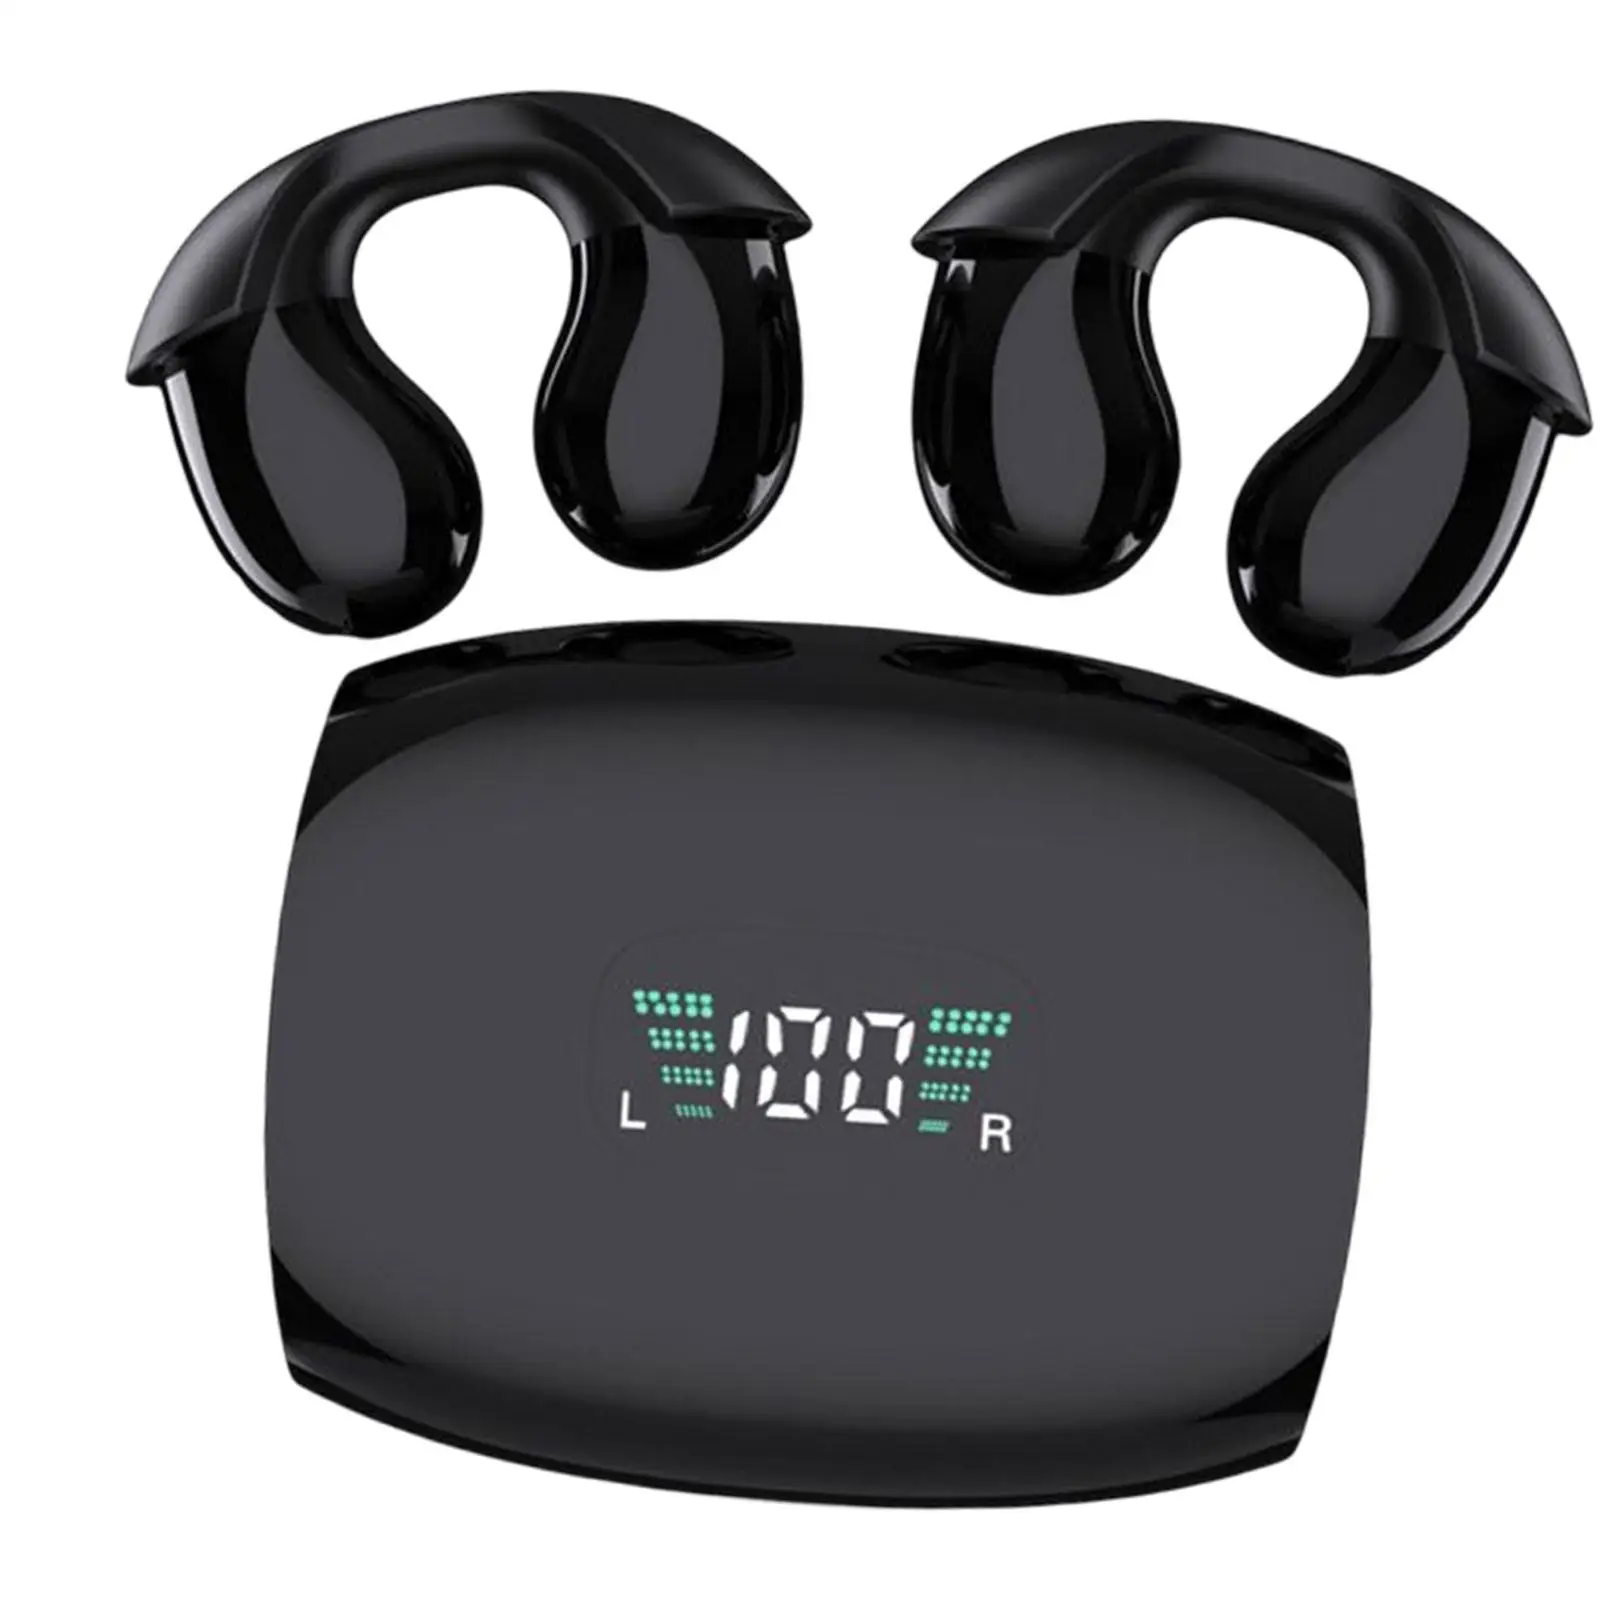 Ear Clip Headphones Touch Control Small Hands Free Premium Sound HiFi Sound Bone Conduction Earbuds for Video Game Music Outdoor